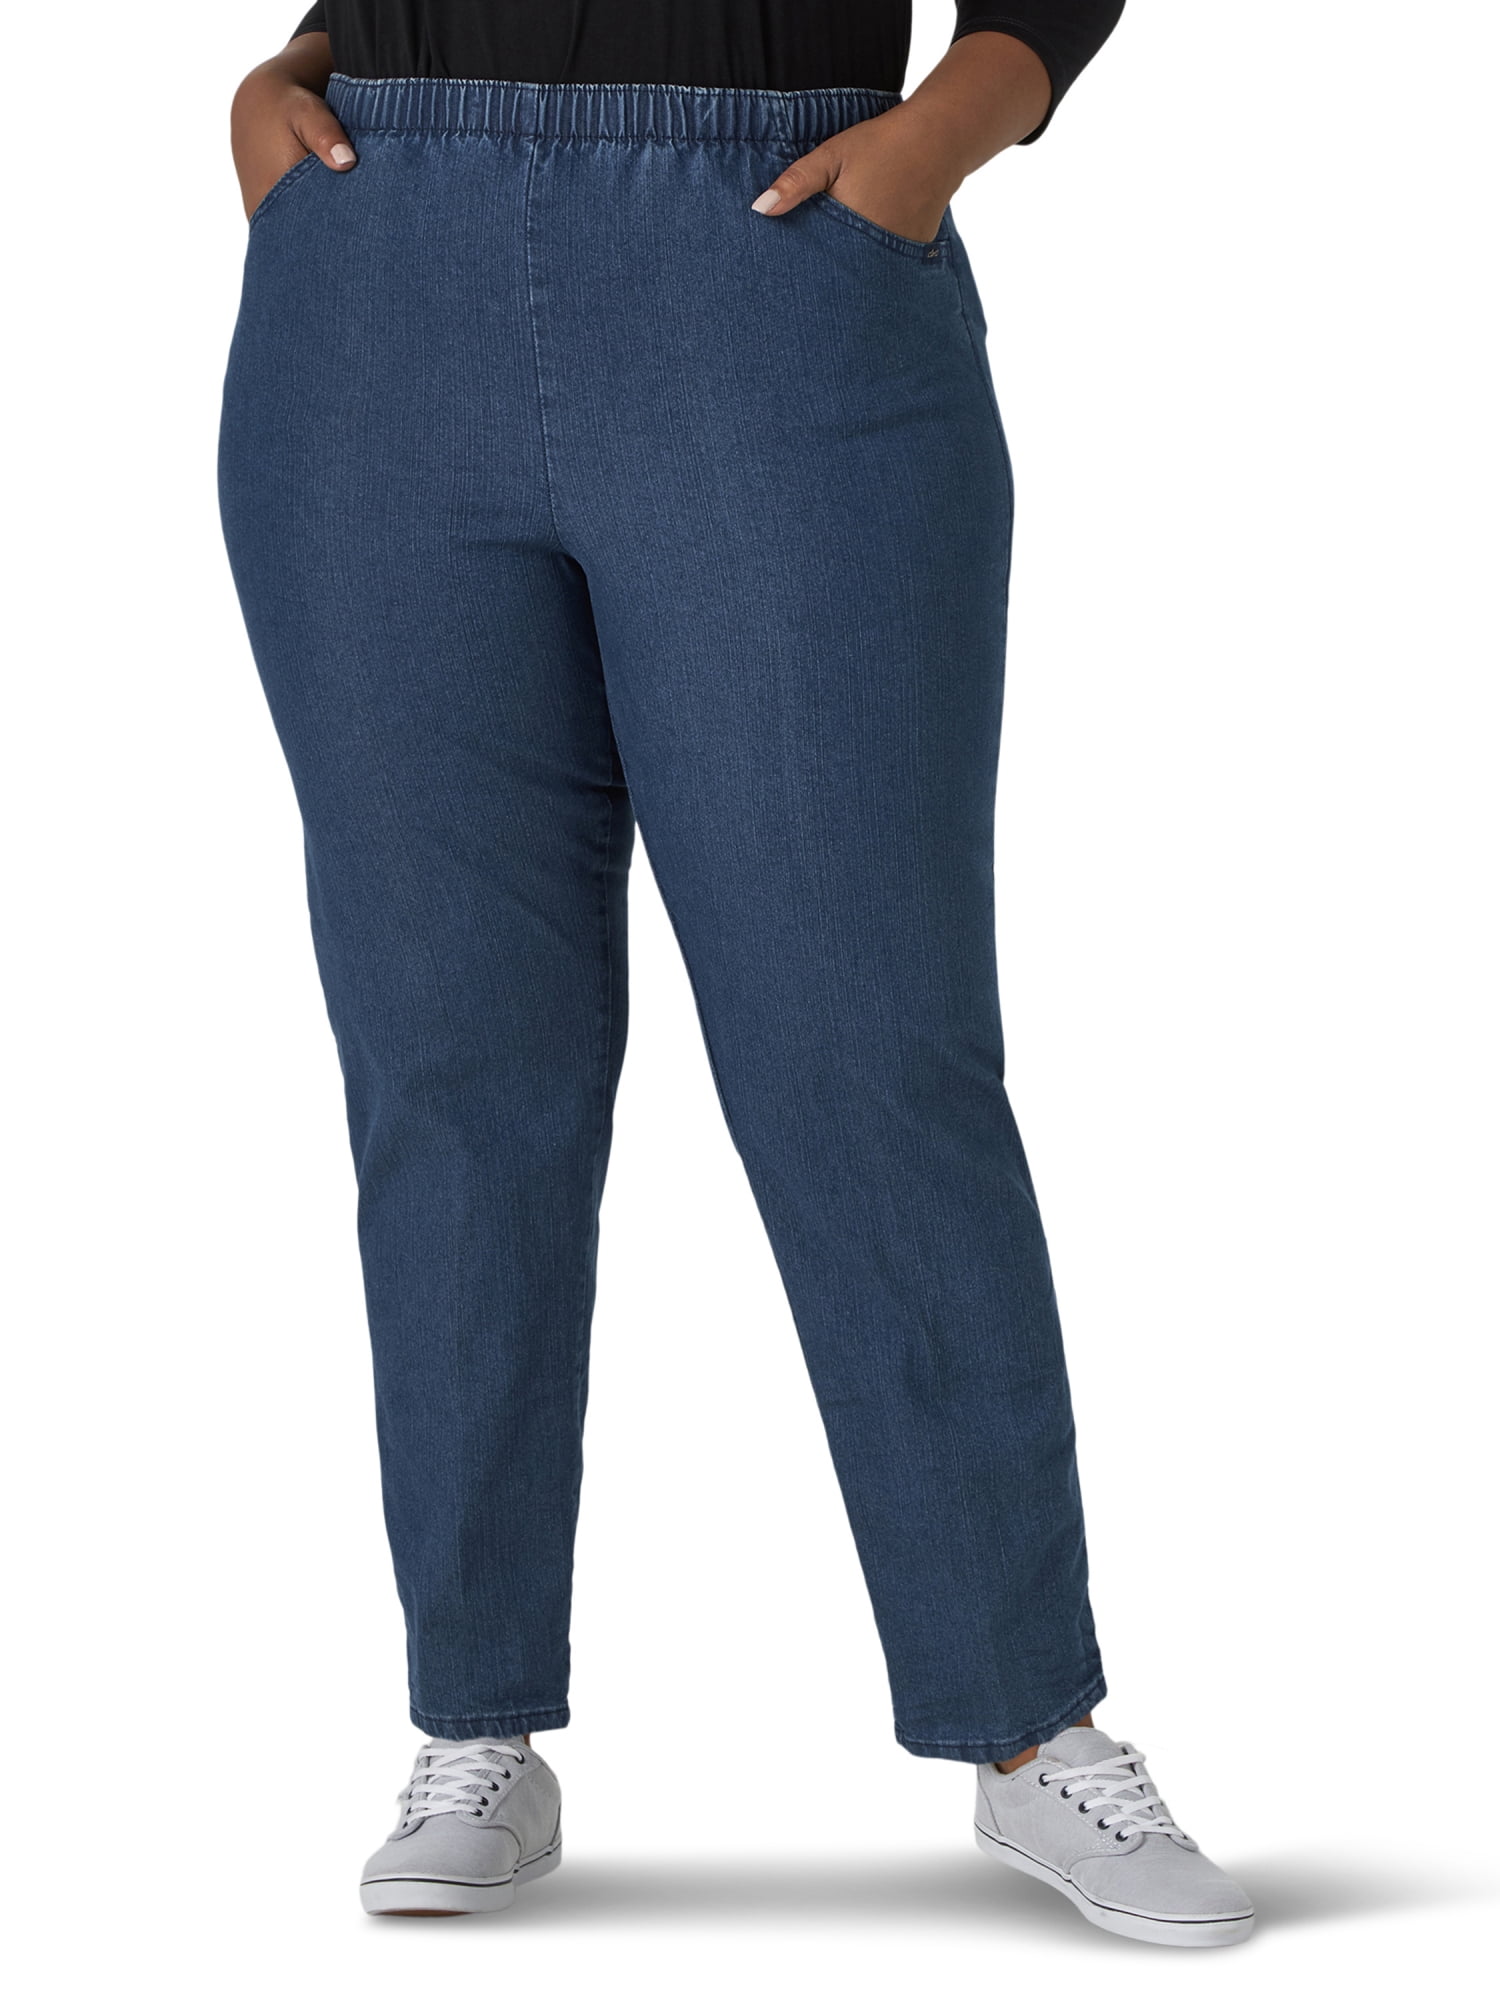 PLUS SIZE Stretch Twill 5 Pocket Skinny Pants with Belt Loop. 60% Cotton,  35% Nylon, 5% Spandex. 10 Pack: 5 1XL/2XL 5 2XL/3XL Made in China., 734880